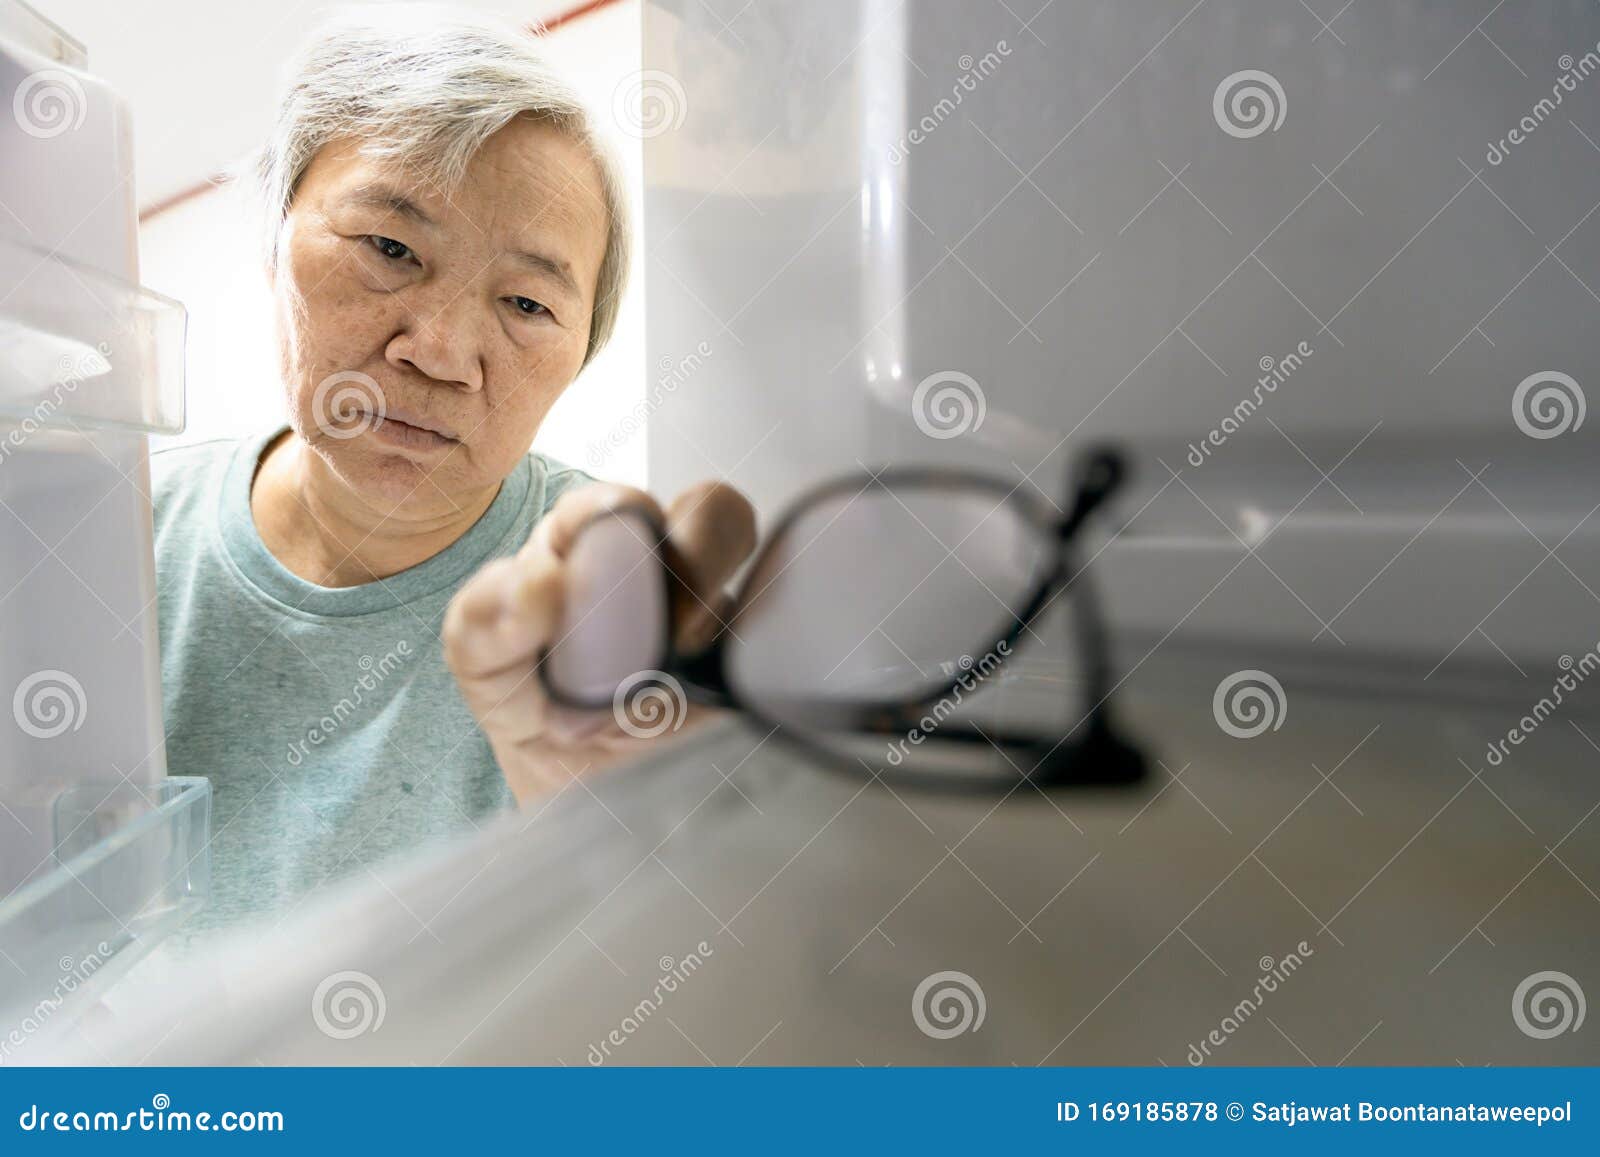 asian senior woman with memory impairment symptoms,forget her glasses in the refrigerator or storing glasses in the fridge,female